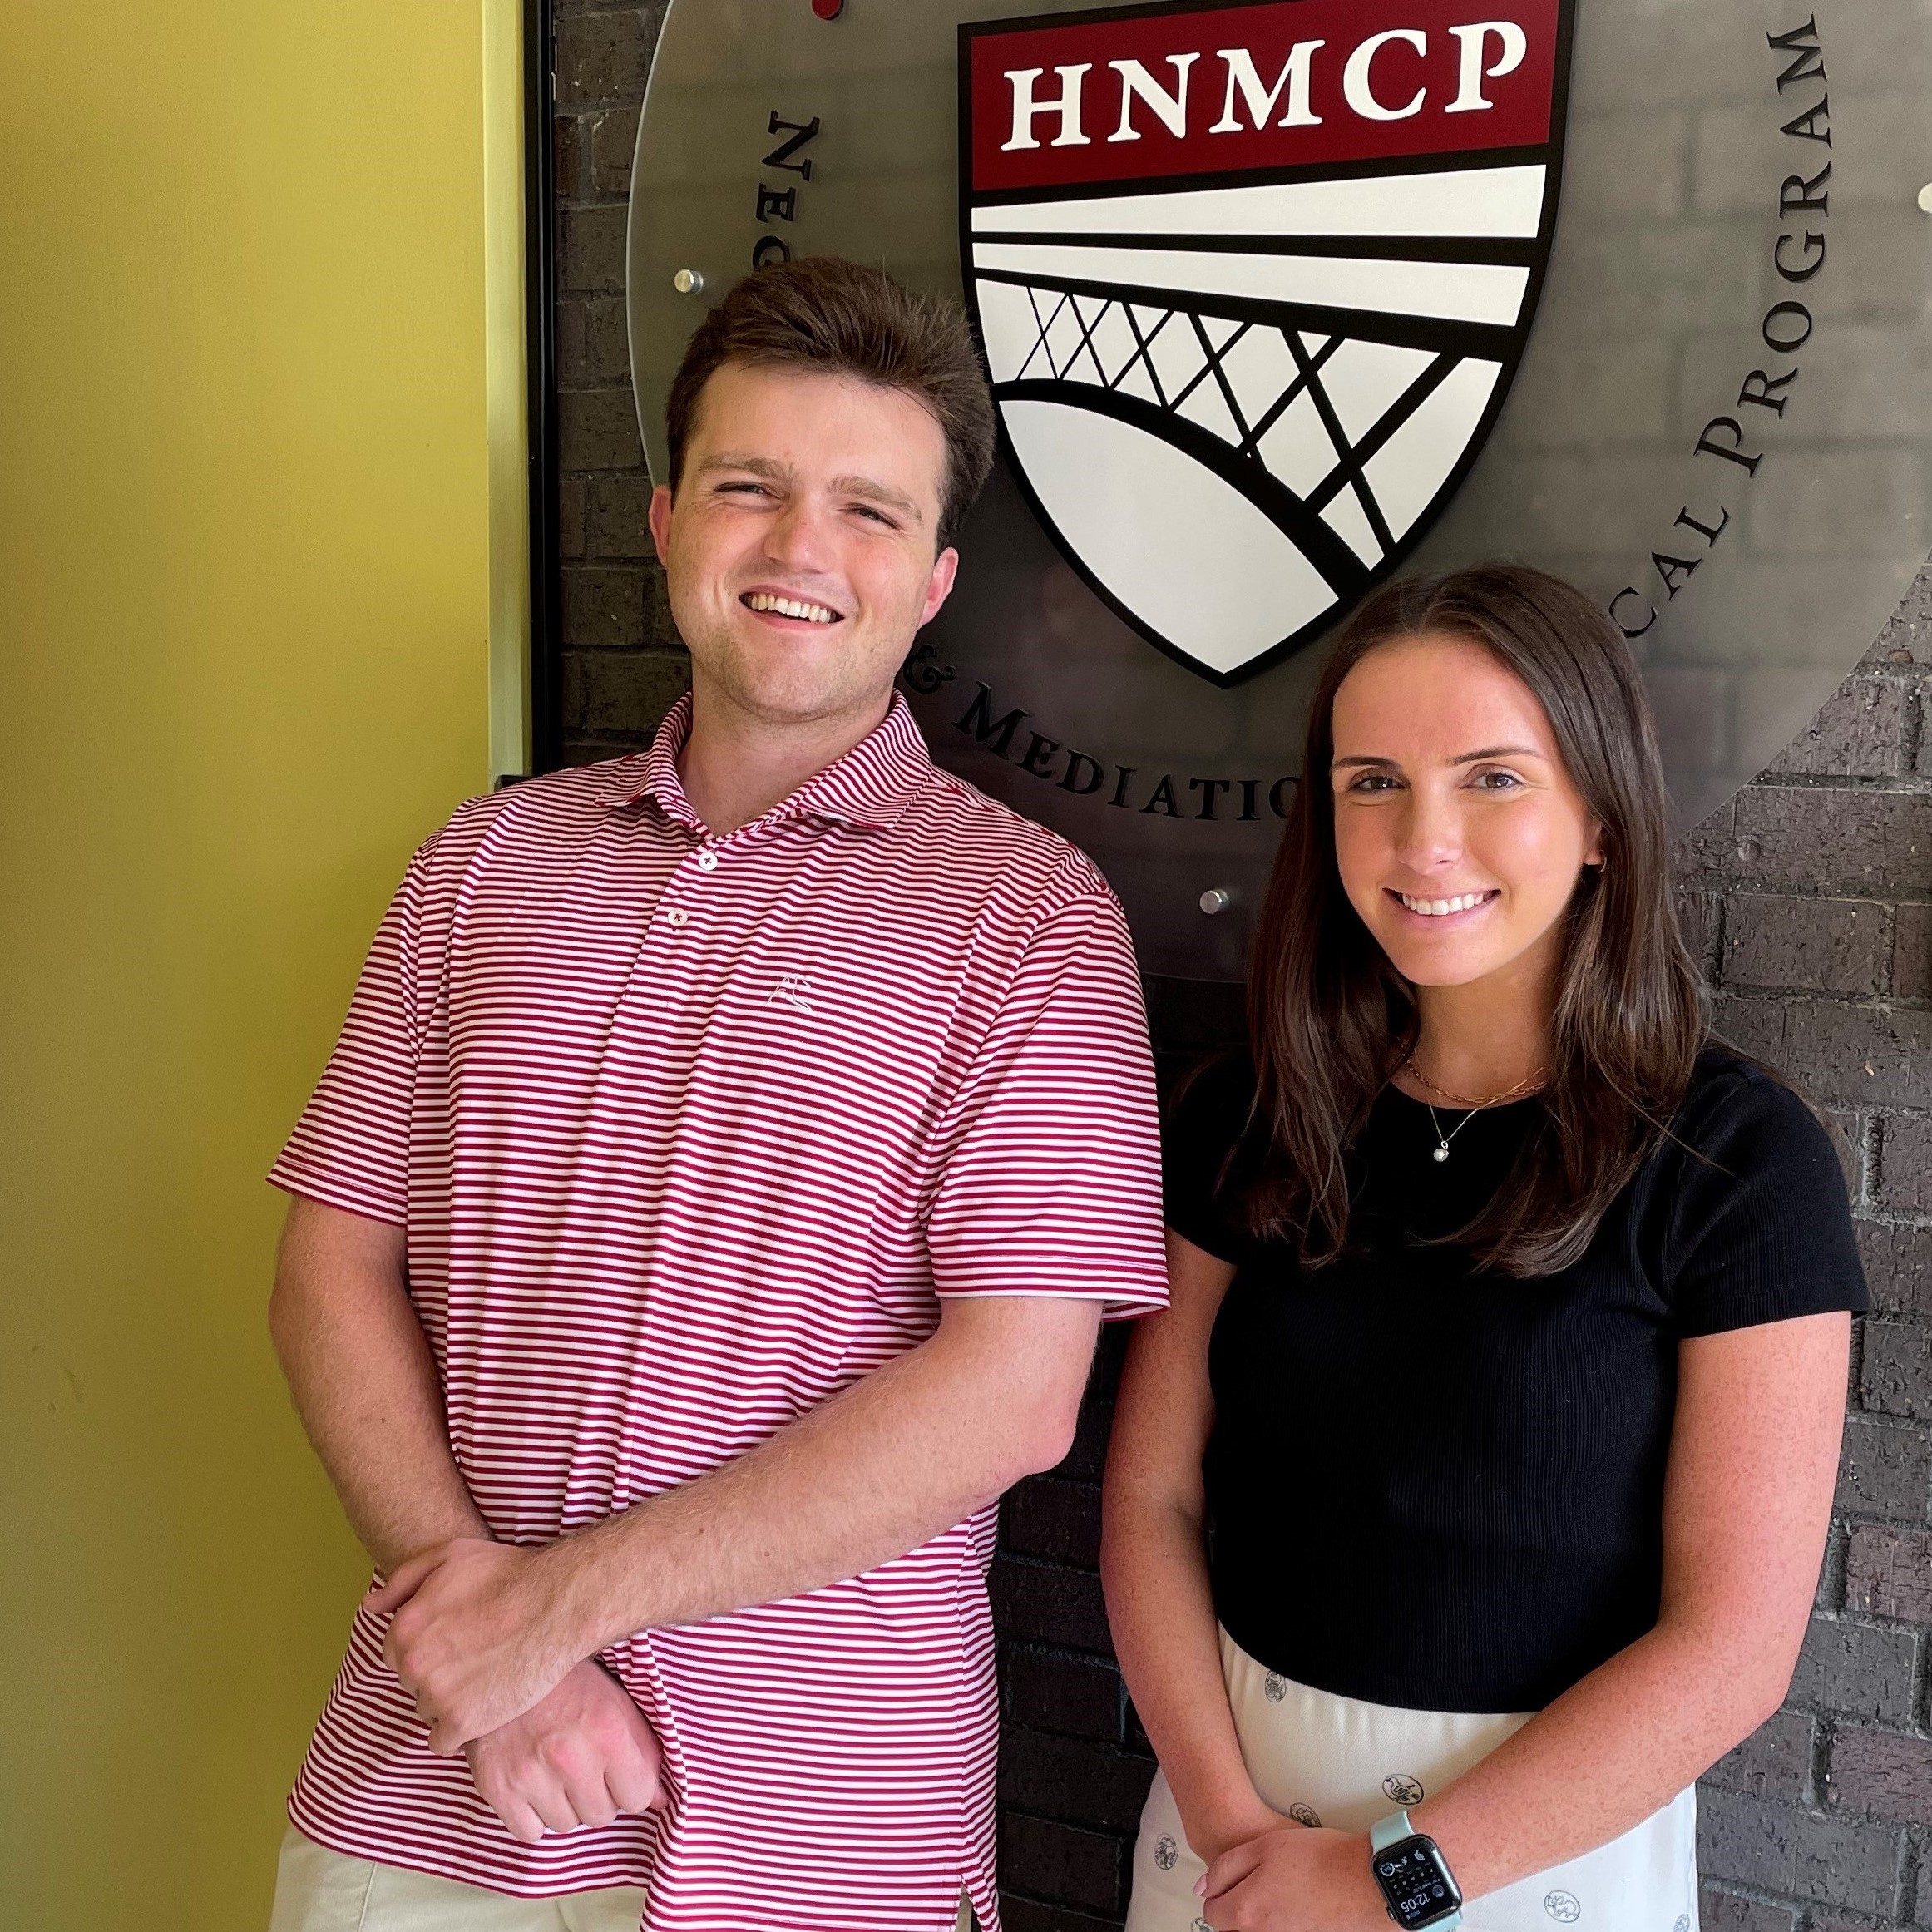 A man and a woman standing in front of the HNMCP logo